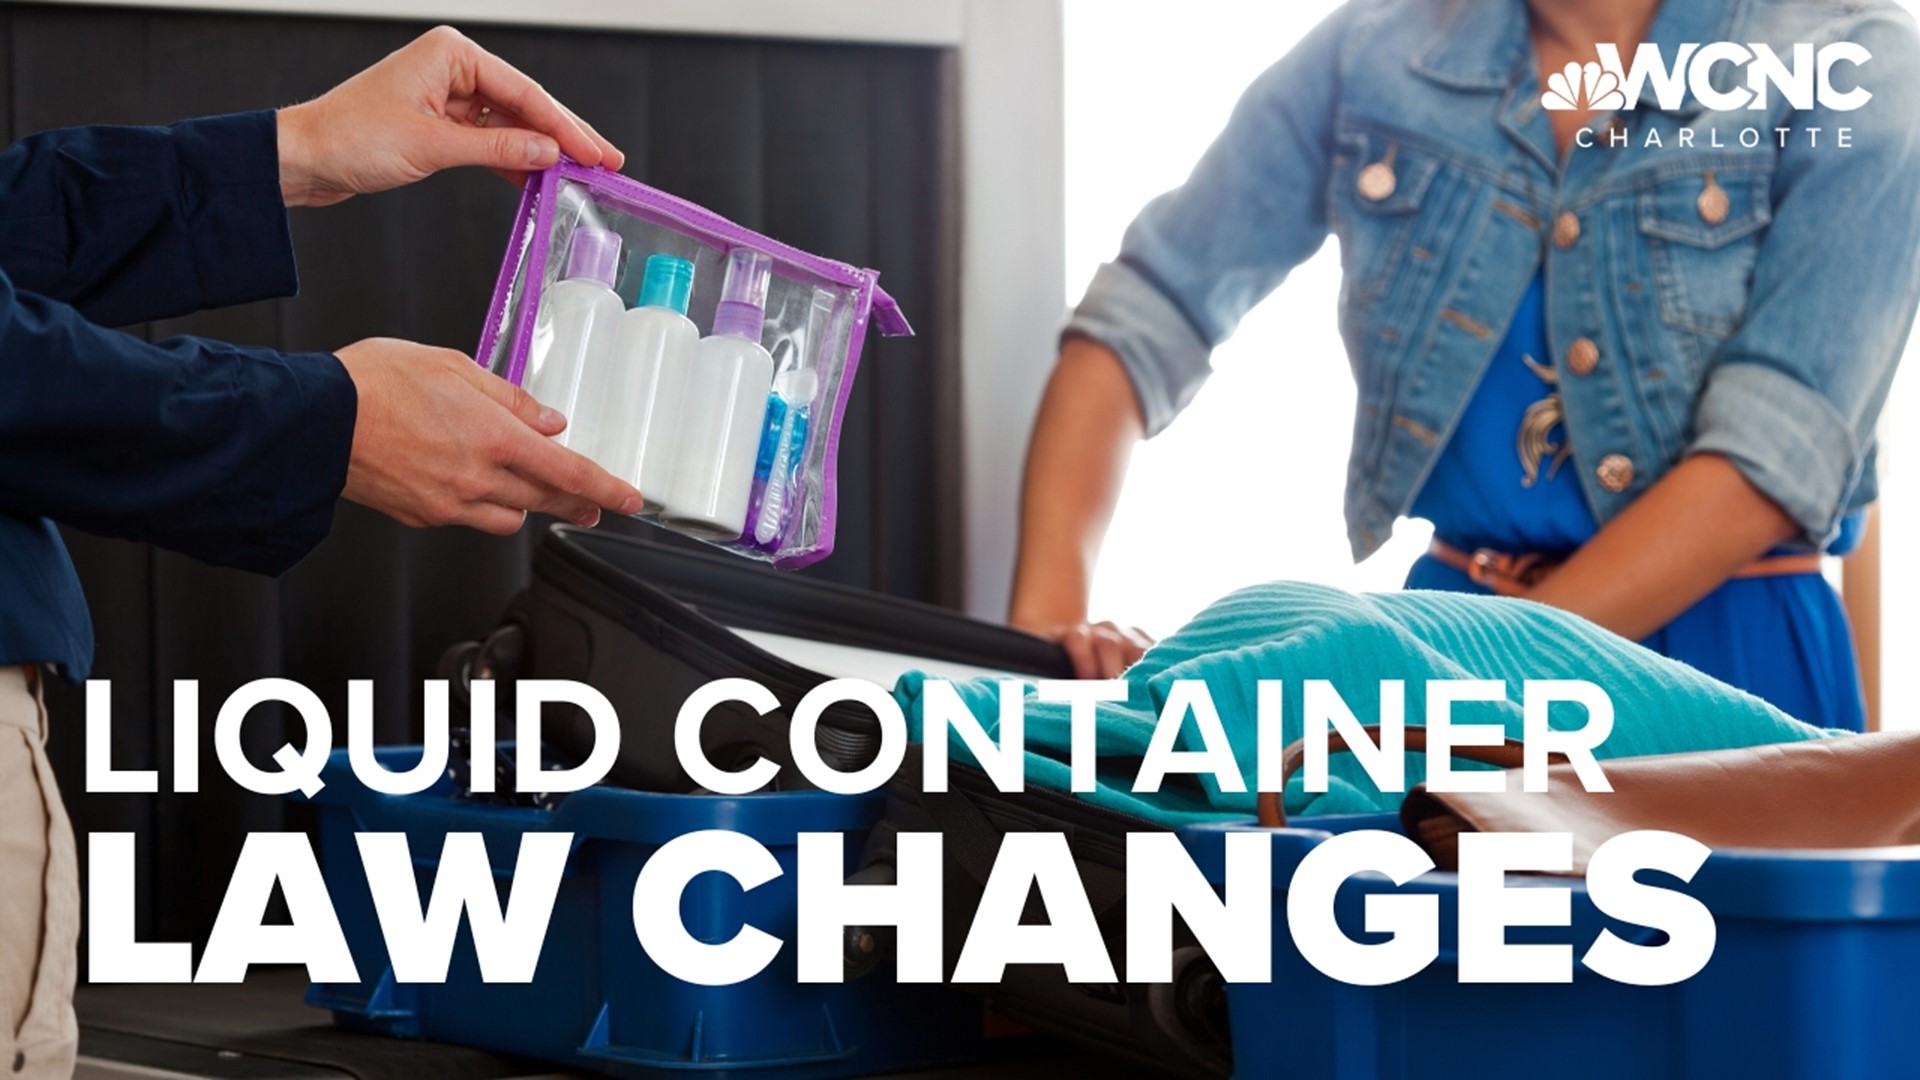 Here's some good news, the little plastic quart-sized baggies and travel containers could soon be a thing of the past.